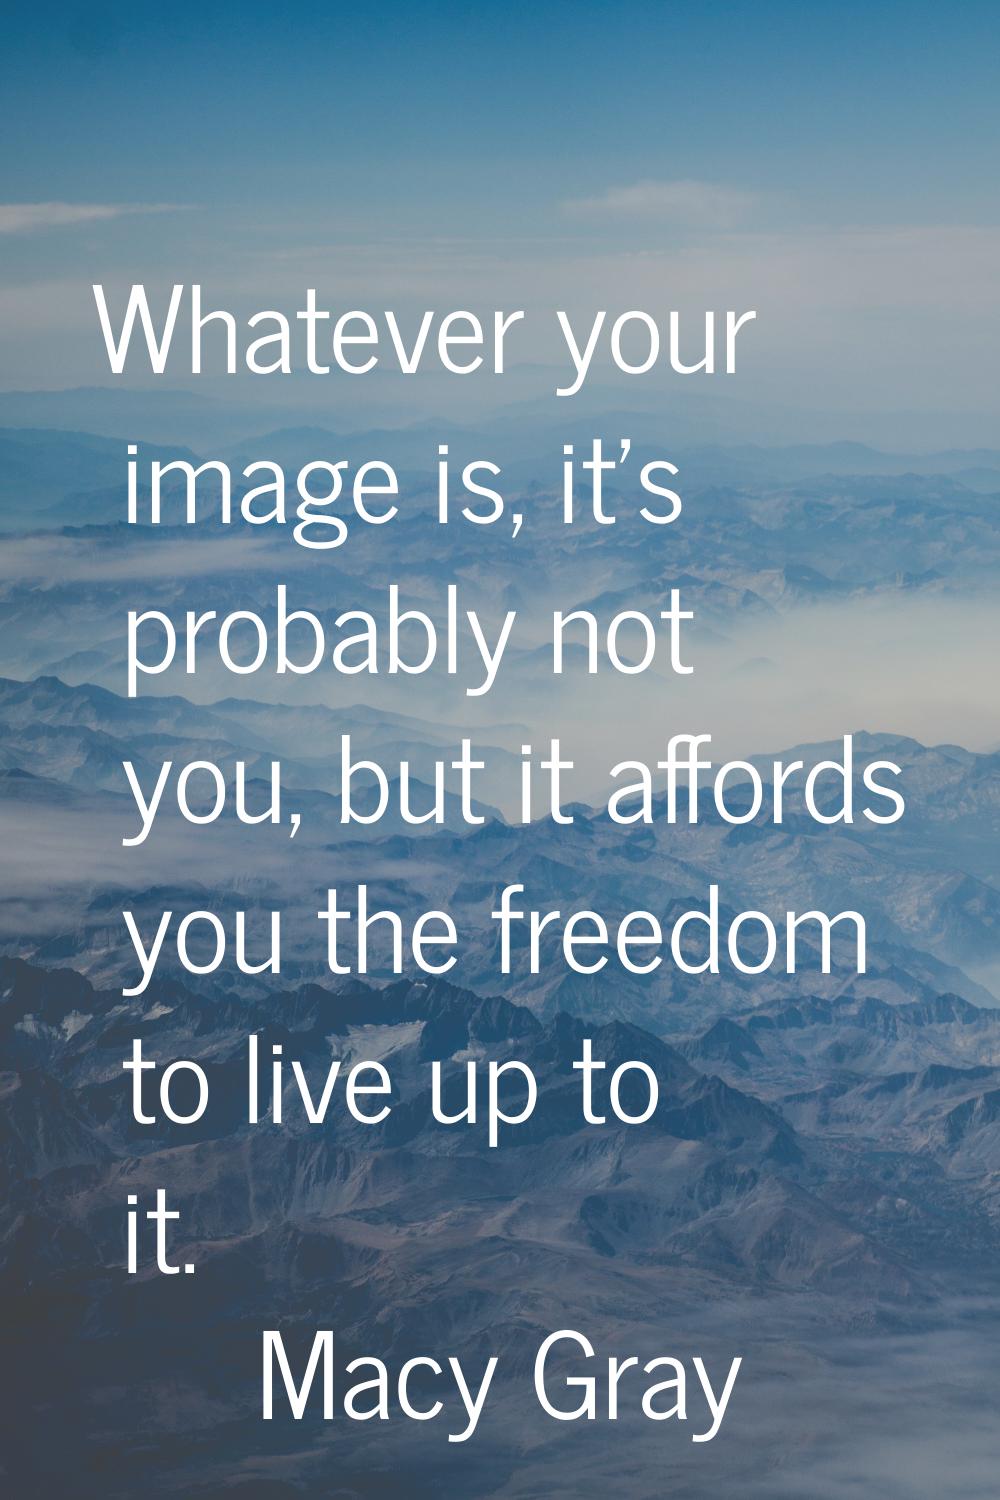 Whatever your image is, it's probably not you, but it affords you the freedom to live up to it.